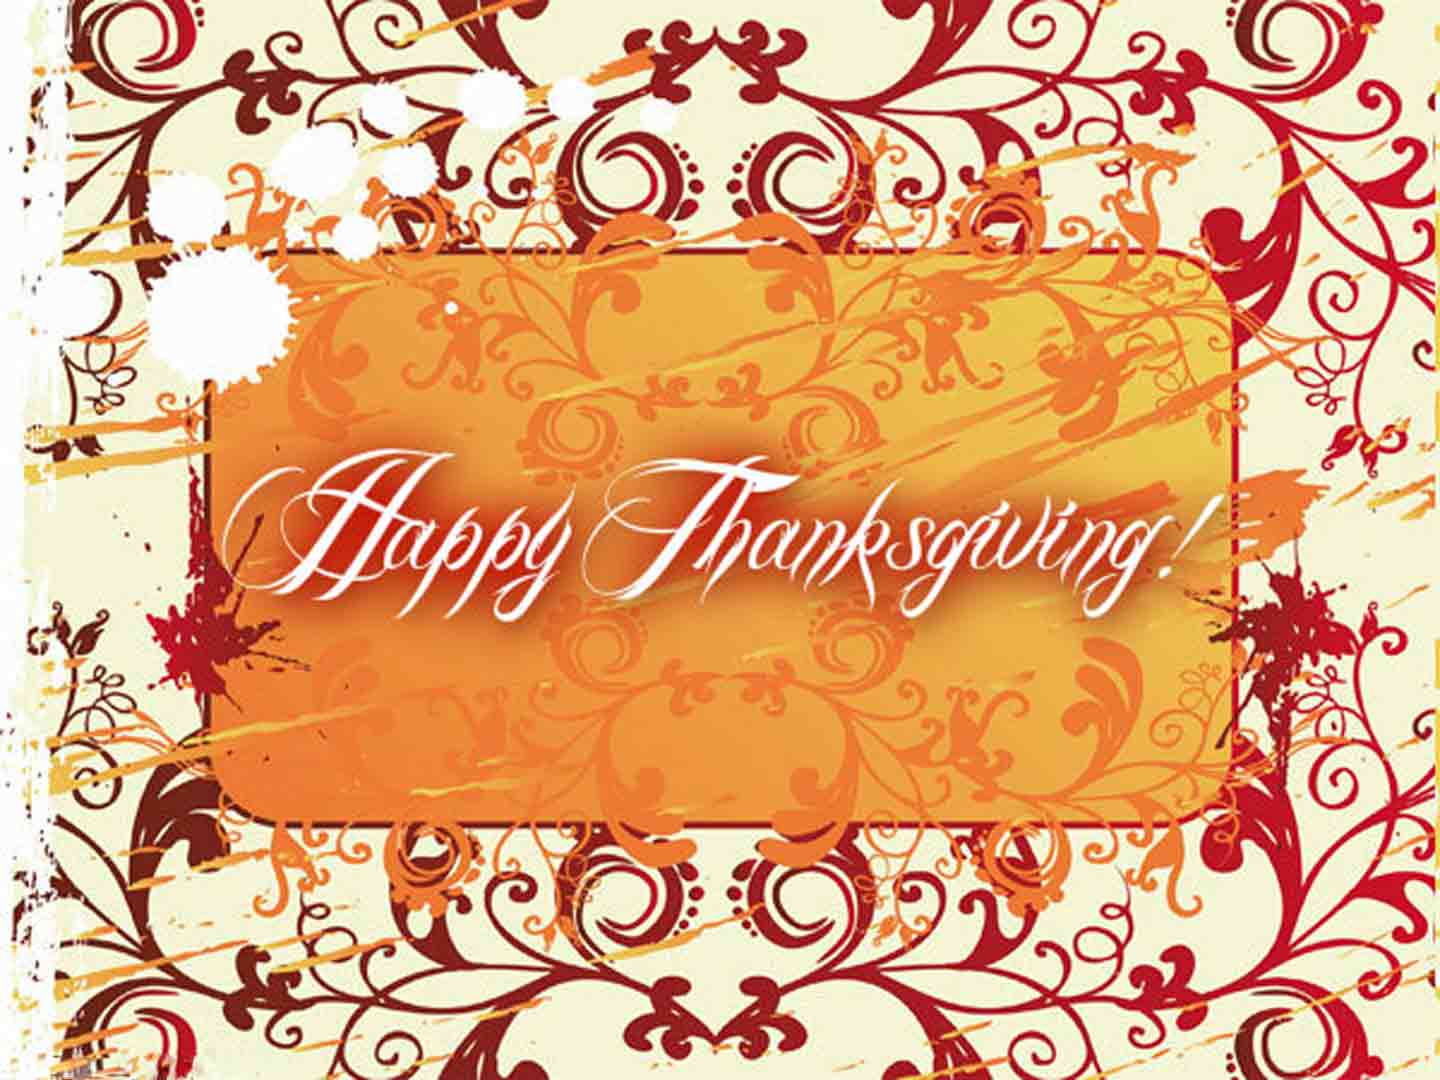 Happy Thanksgiving Image Pictures Photos Wallpaper For